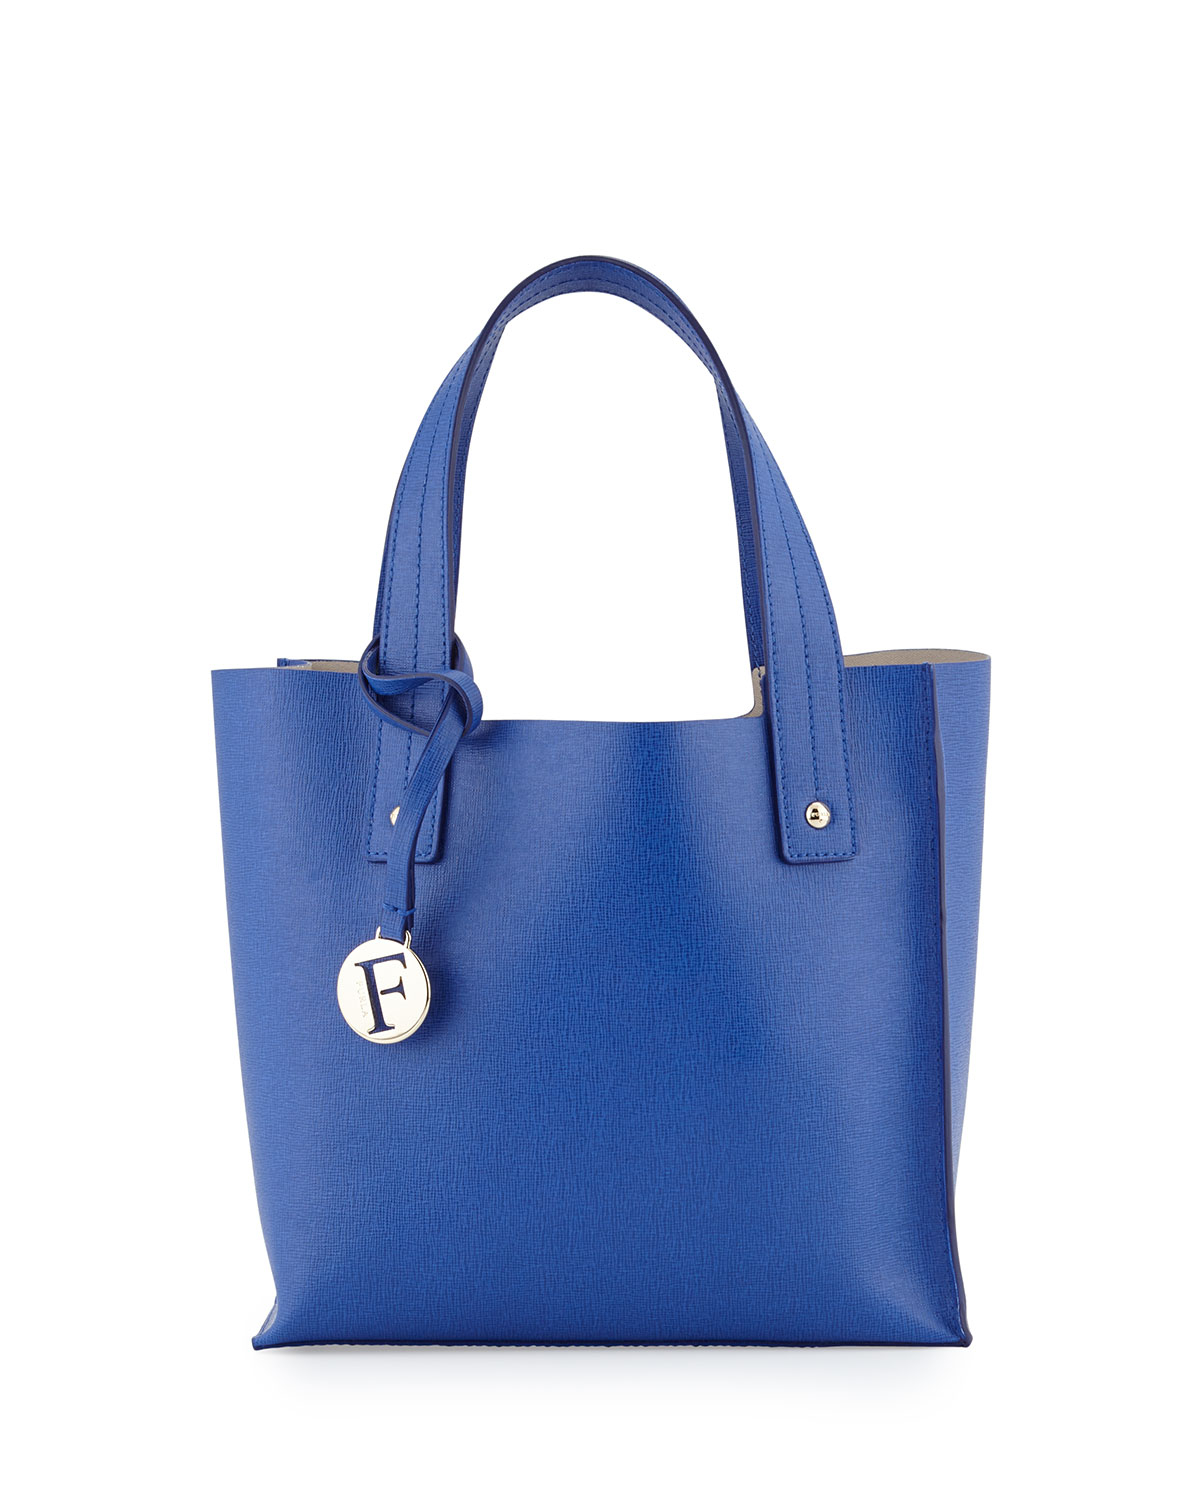 Furla Musa Small Leather Tote Bag in Blue - Lyst